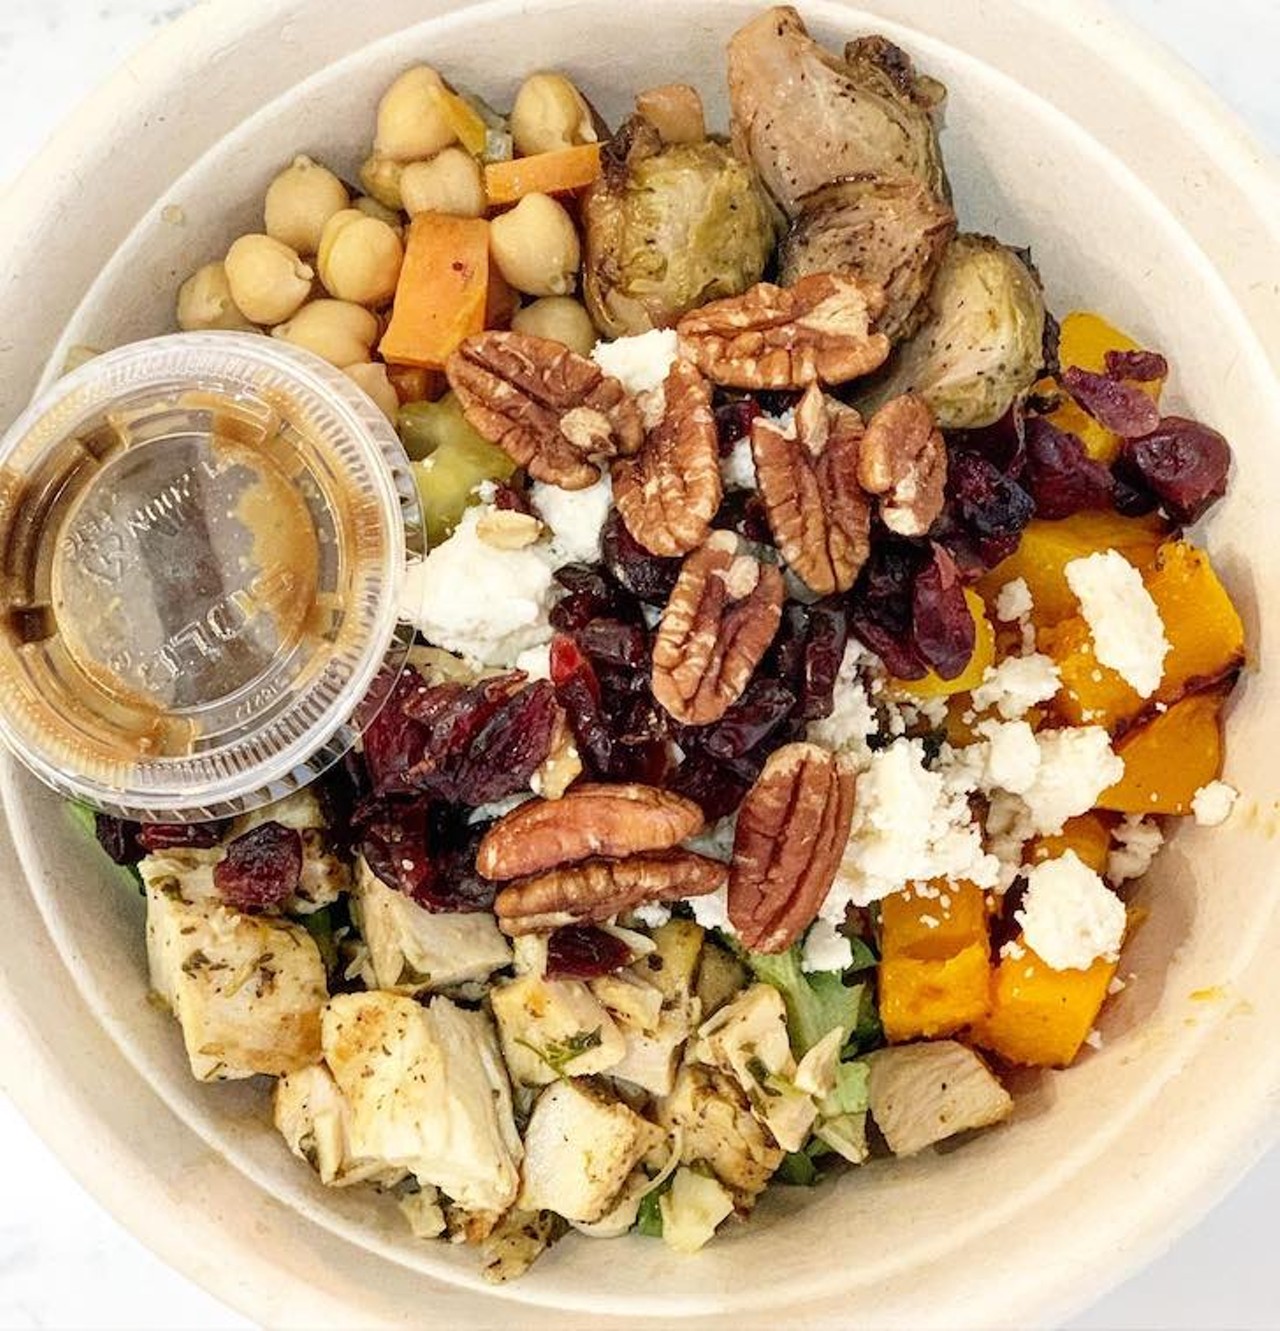 Harvest Bowl
6109 N. Florida Ave., Tampa
I go to Harvest Bowl a lot because I can grab something quick and healthy during the day on my way into Rooster. It's hard to eat clean and quick, so this fills a good void for me. 
&#151;Ferrell Alvrarez
Photo via harvestbowltampa/Facebook